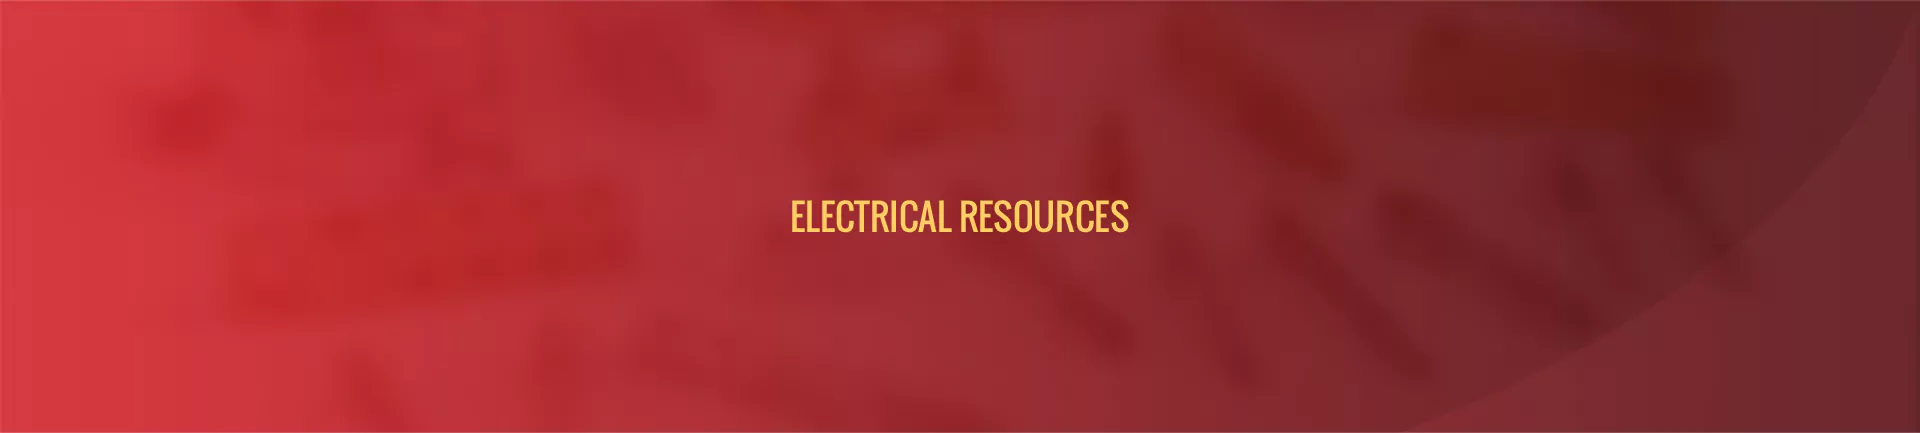 electrical-resources-banner